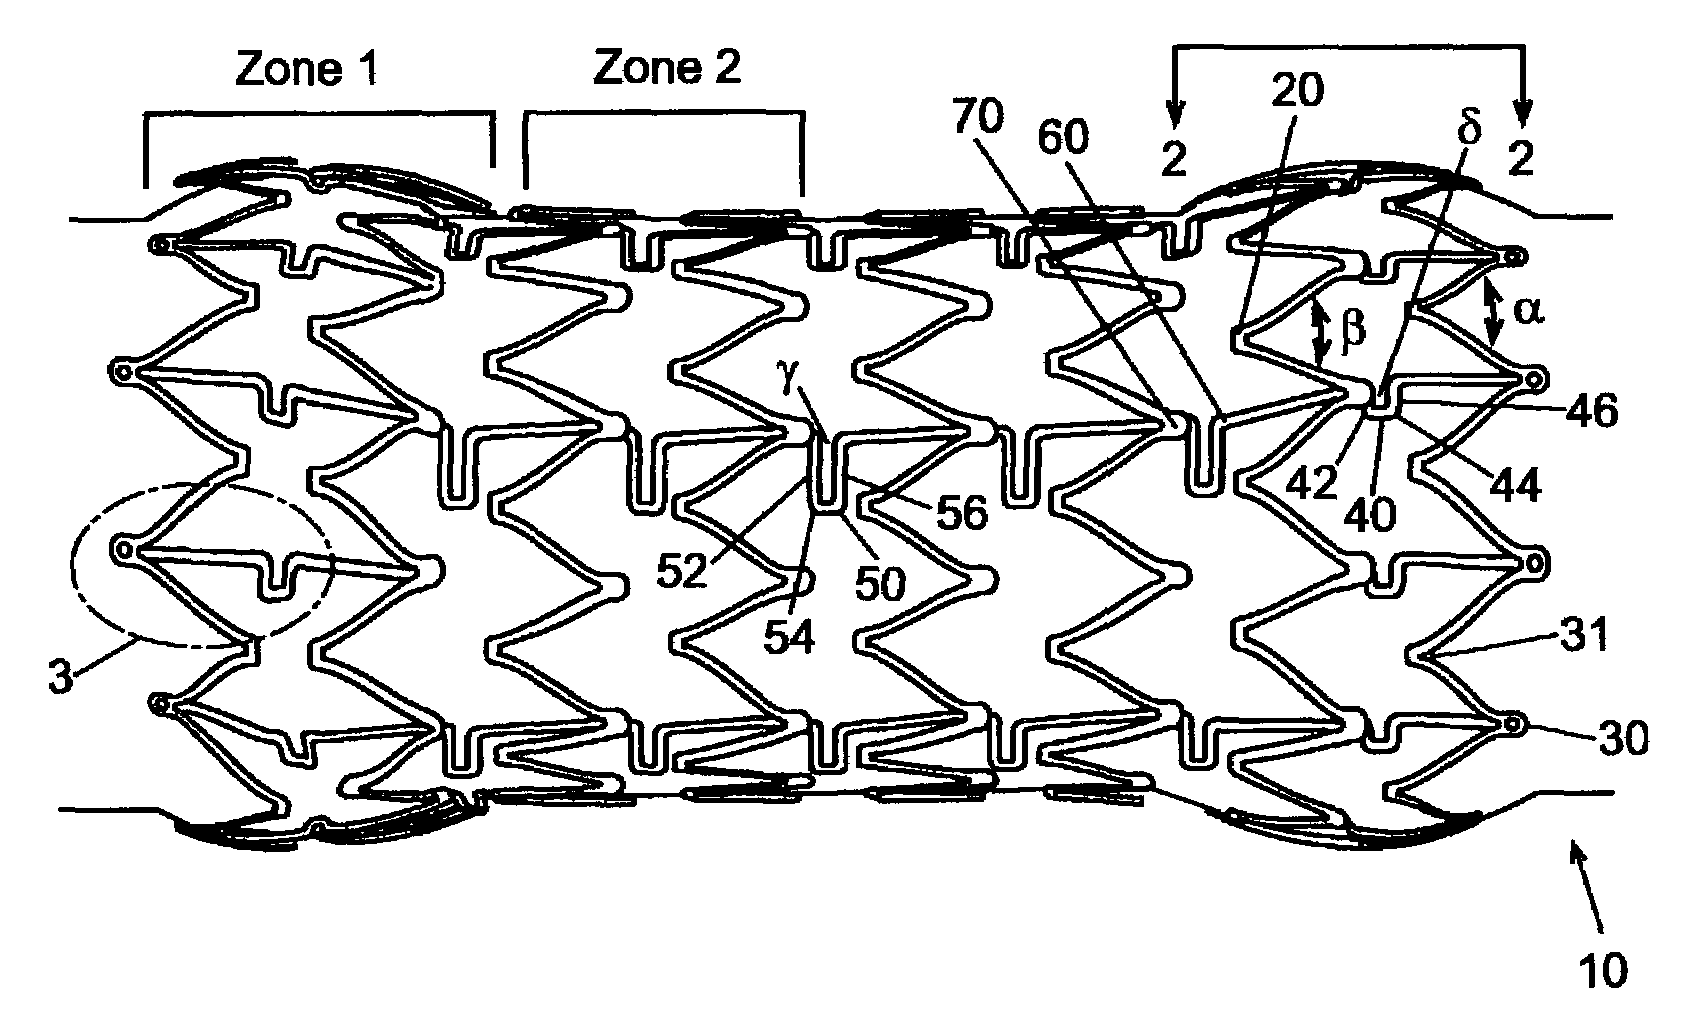 Stent with geometry determinated functionality and method of making the same